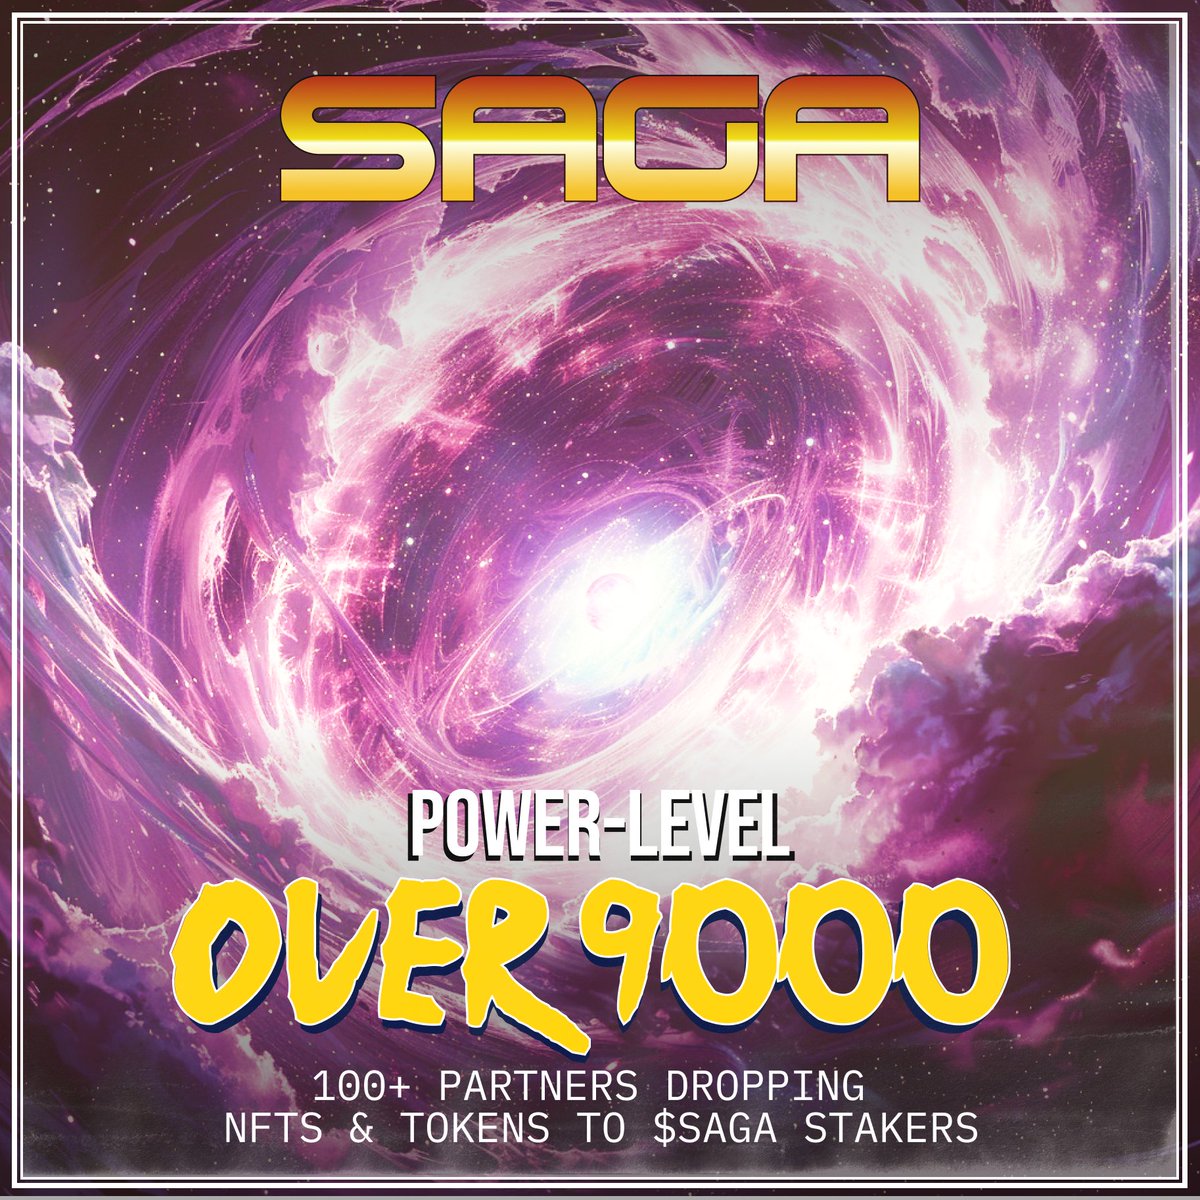 Introducing Power-Level Over 9000! Through this campaign $SAGA stakers will be leveling up all year with token & NFT drops from over 100+ confirmed projects across web3 such as: @playSHRAPNEL @TheSandboxGame @WilderWorld @YieldGuild @EnginesOfFury @XPLA_Official @Blade_rite…